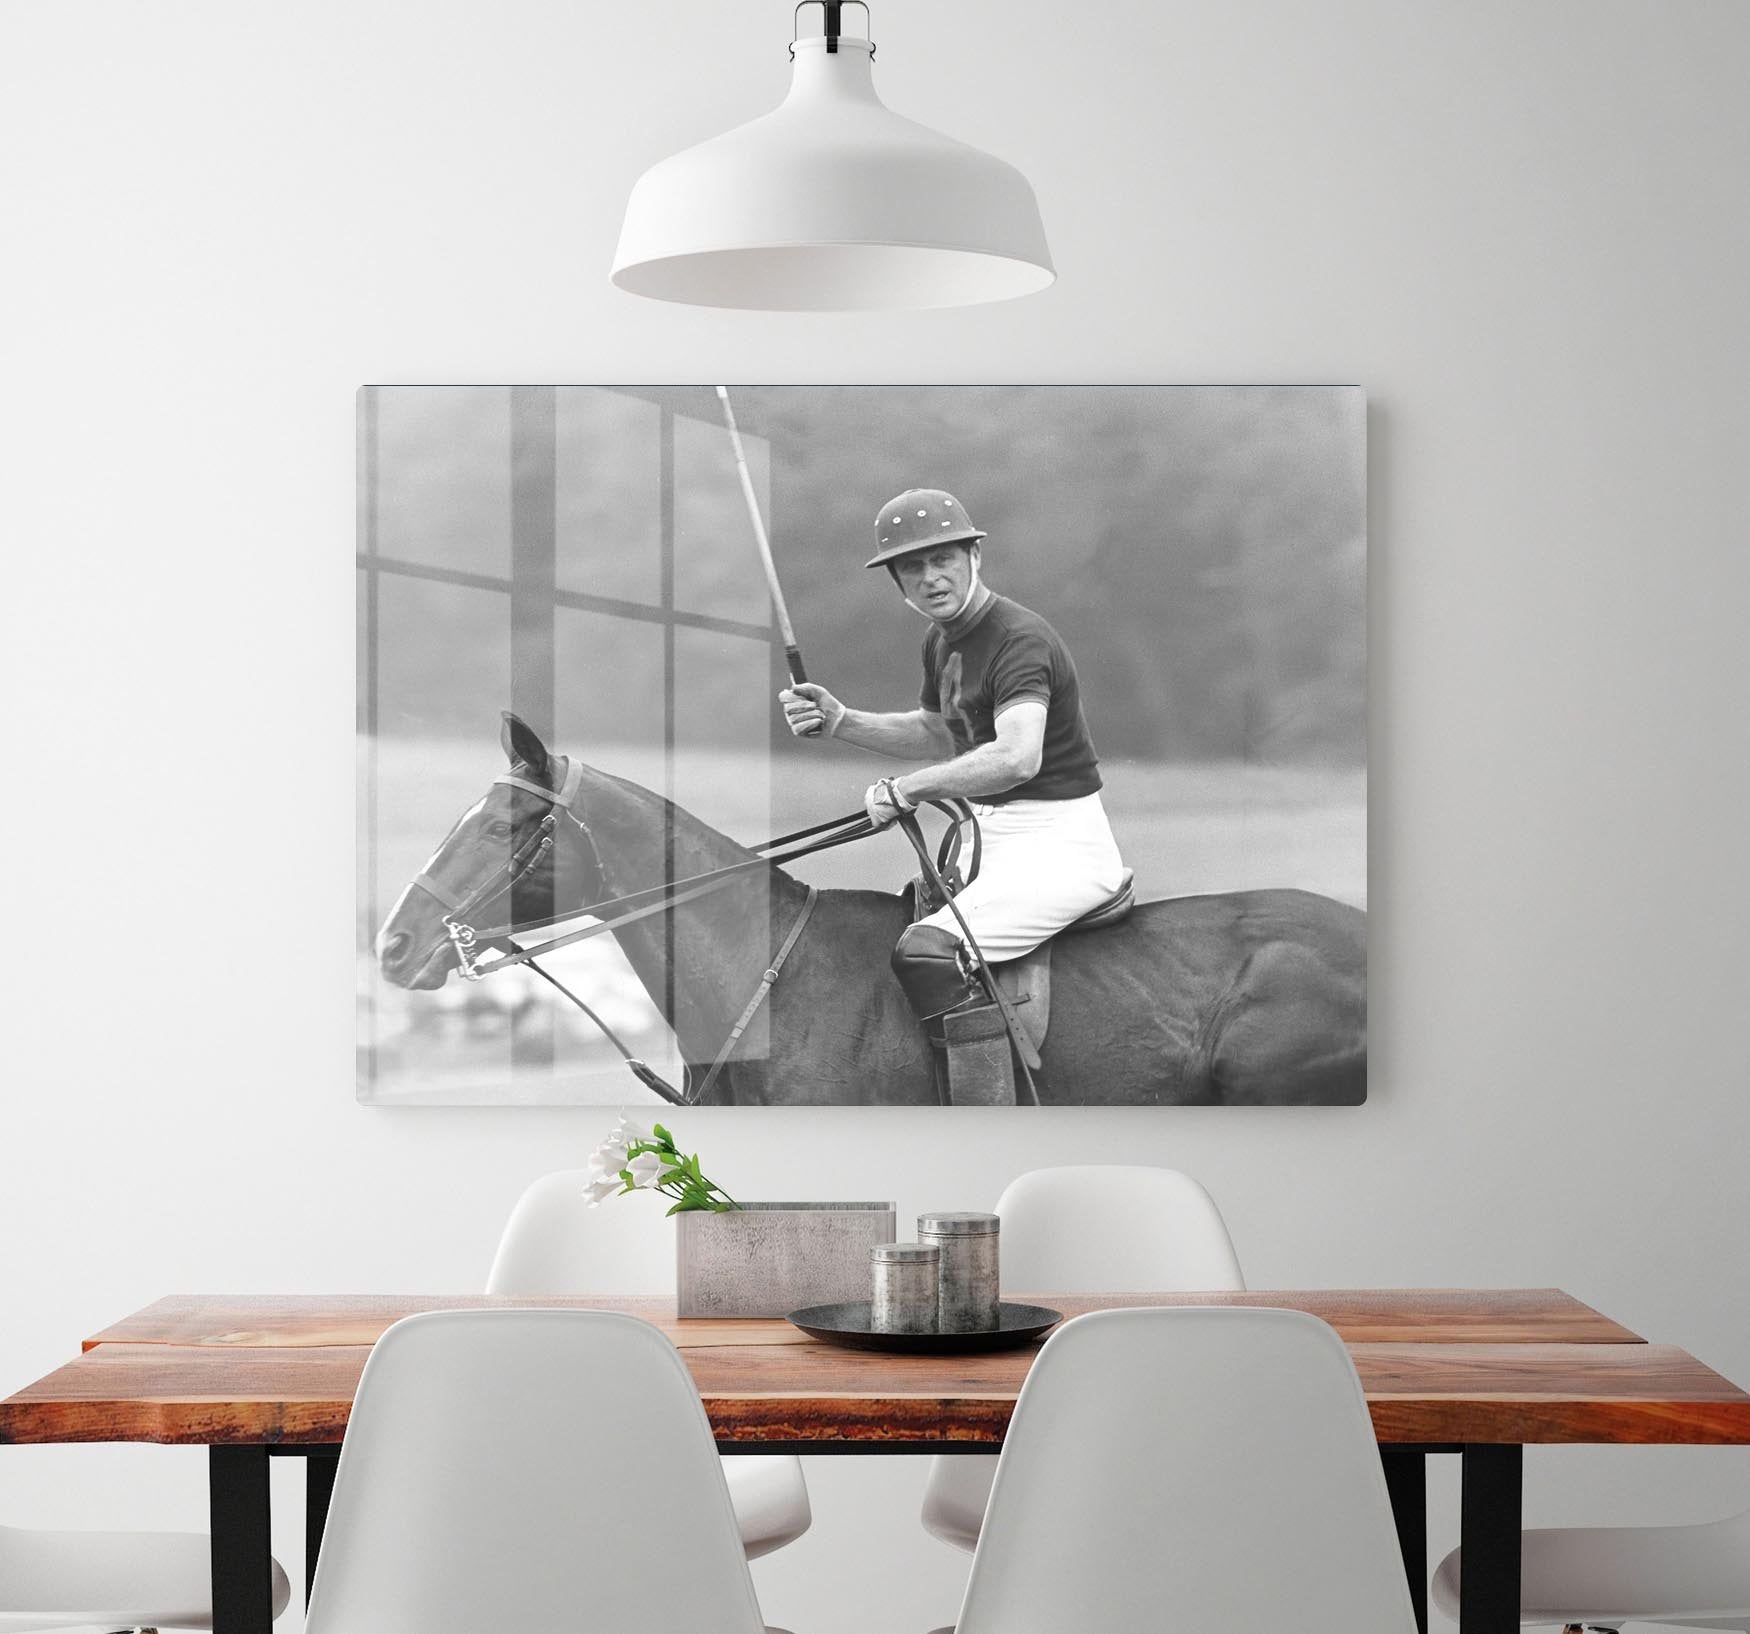 Prince Philip shown winning the polo Gold Cup HD Metal Print